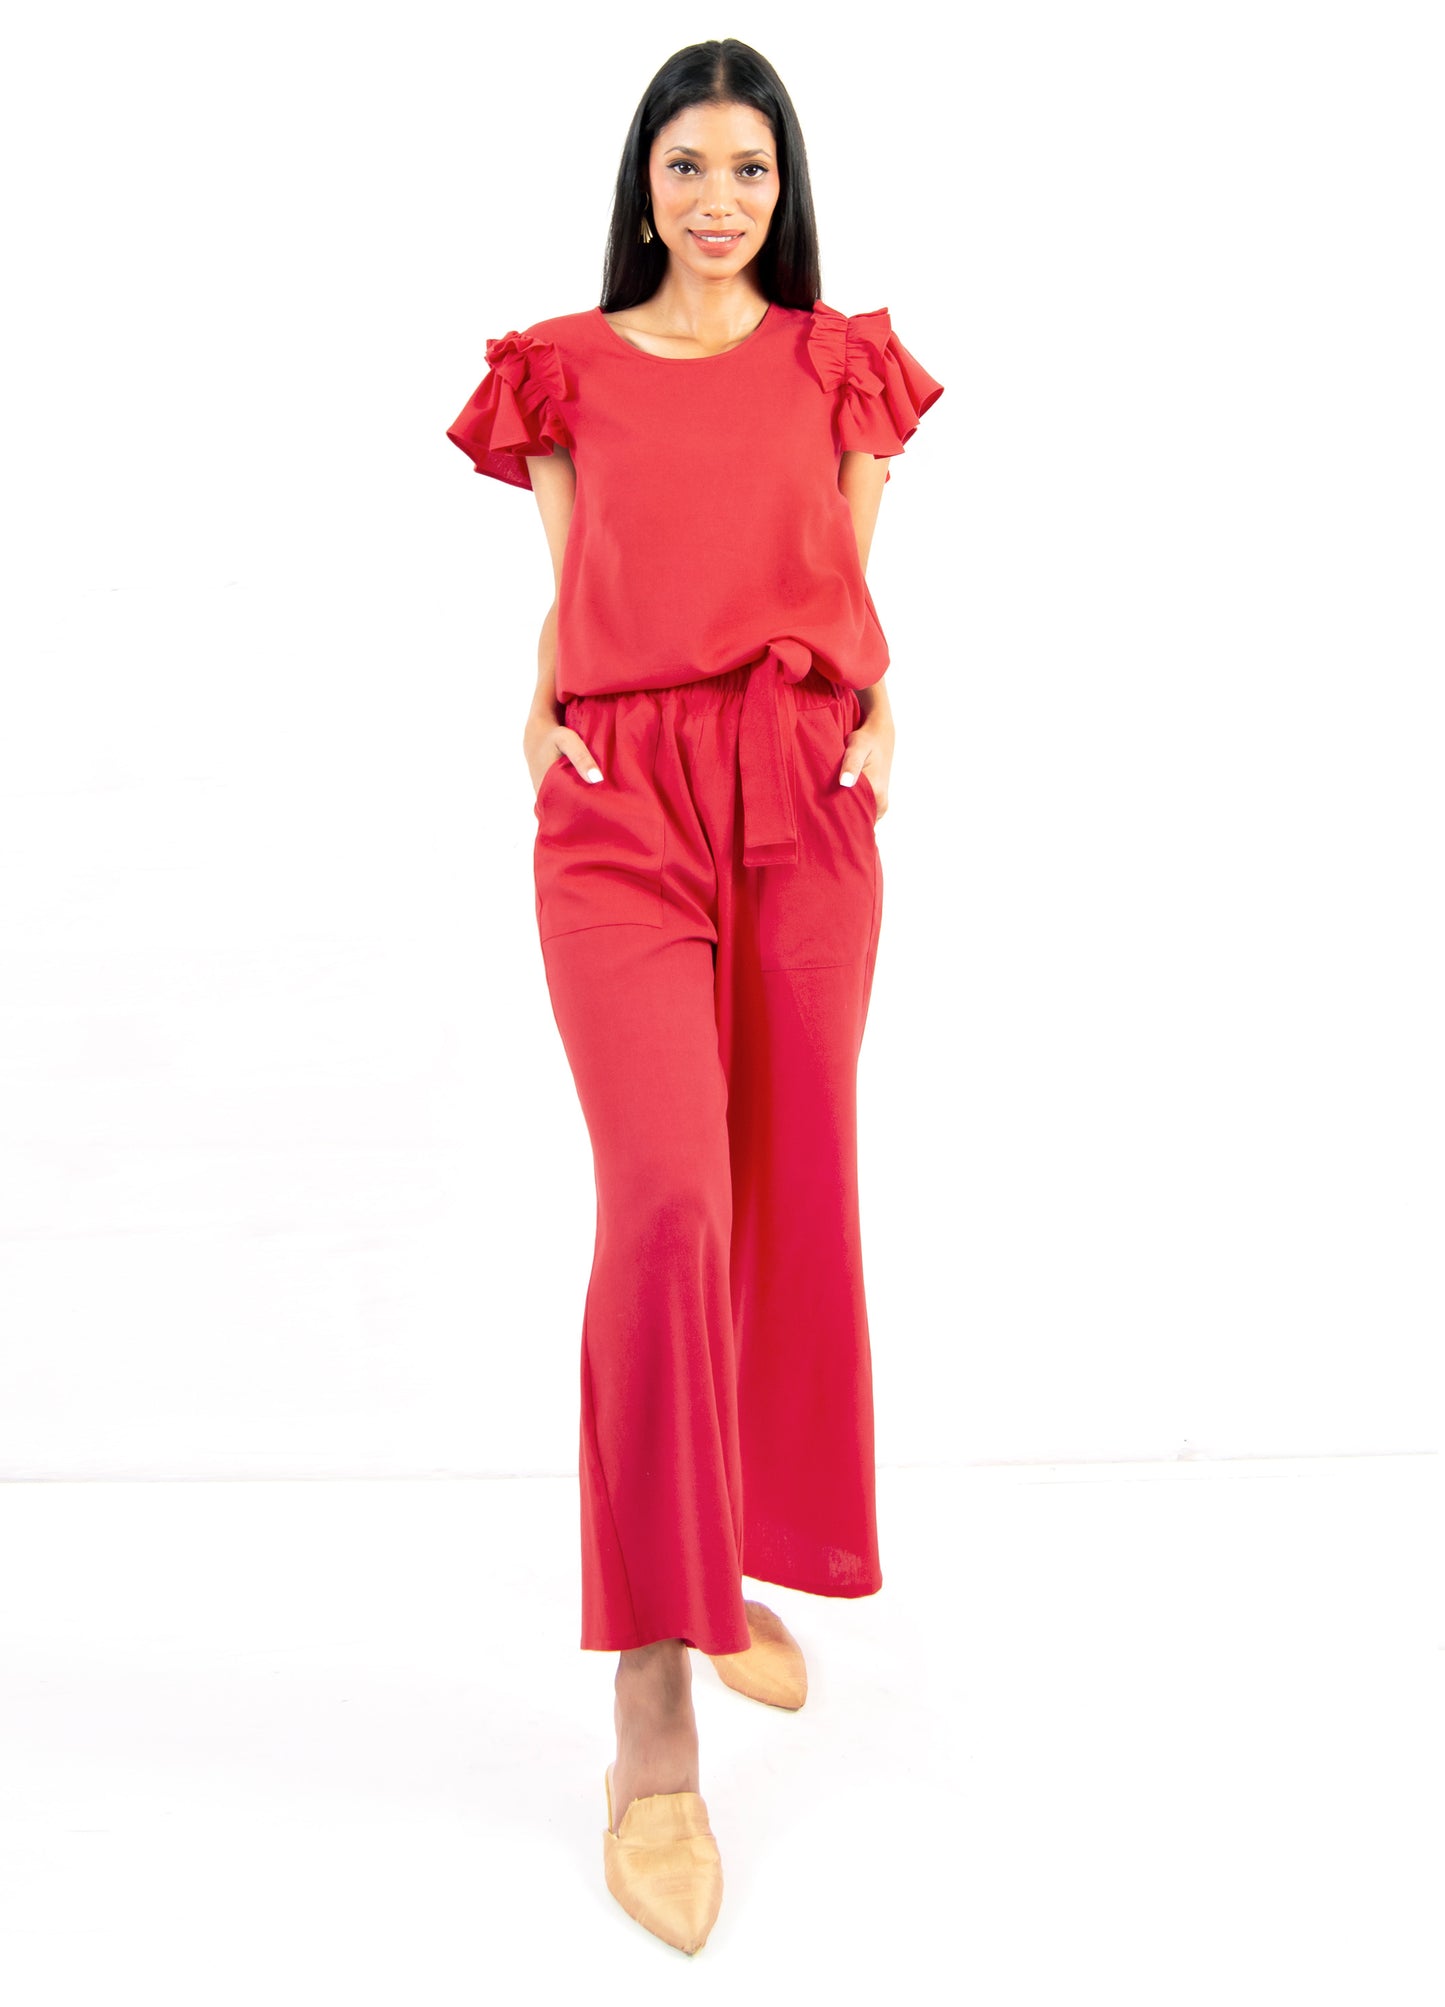 Romie frill shell top in Cherry